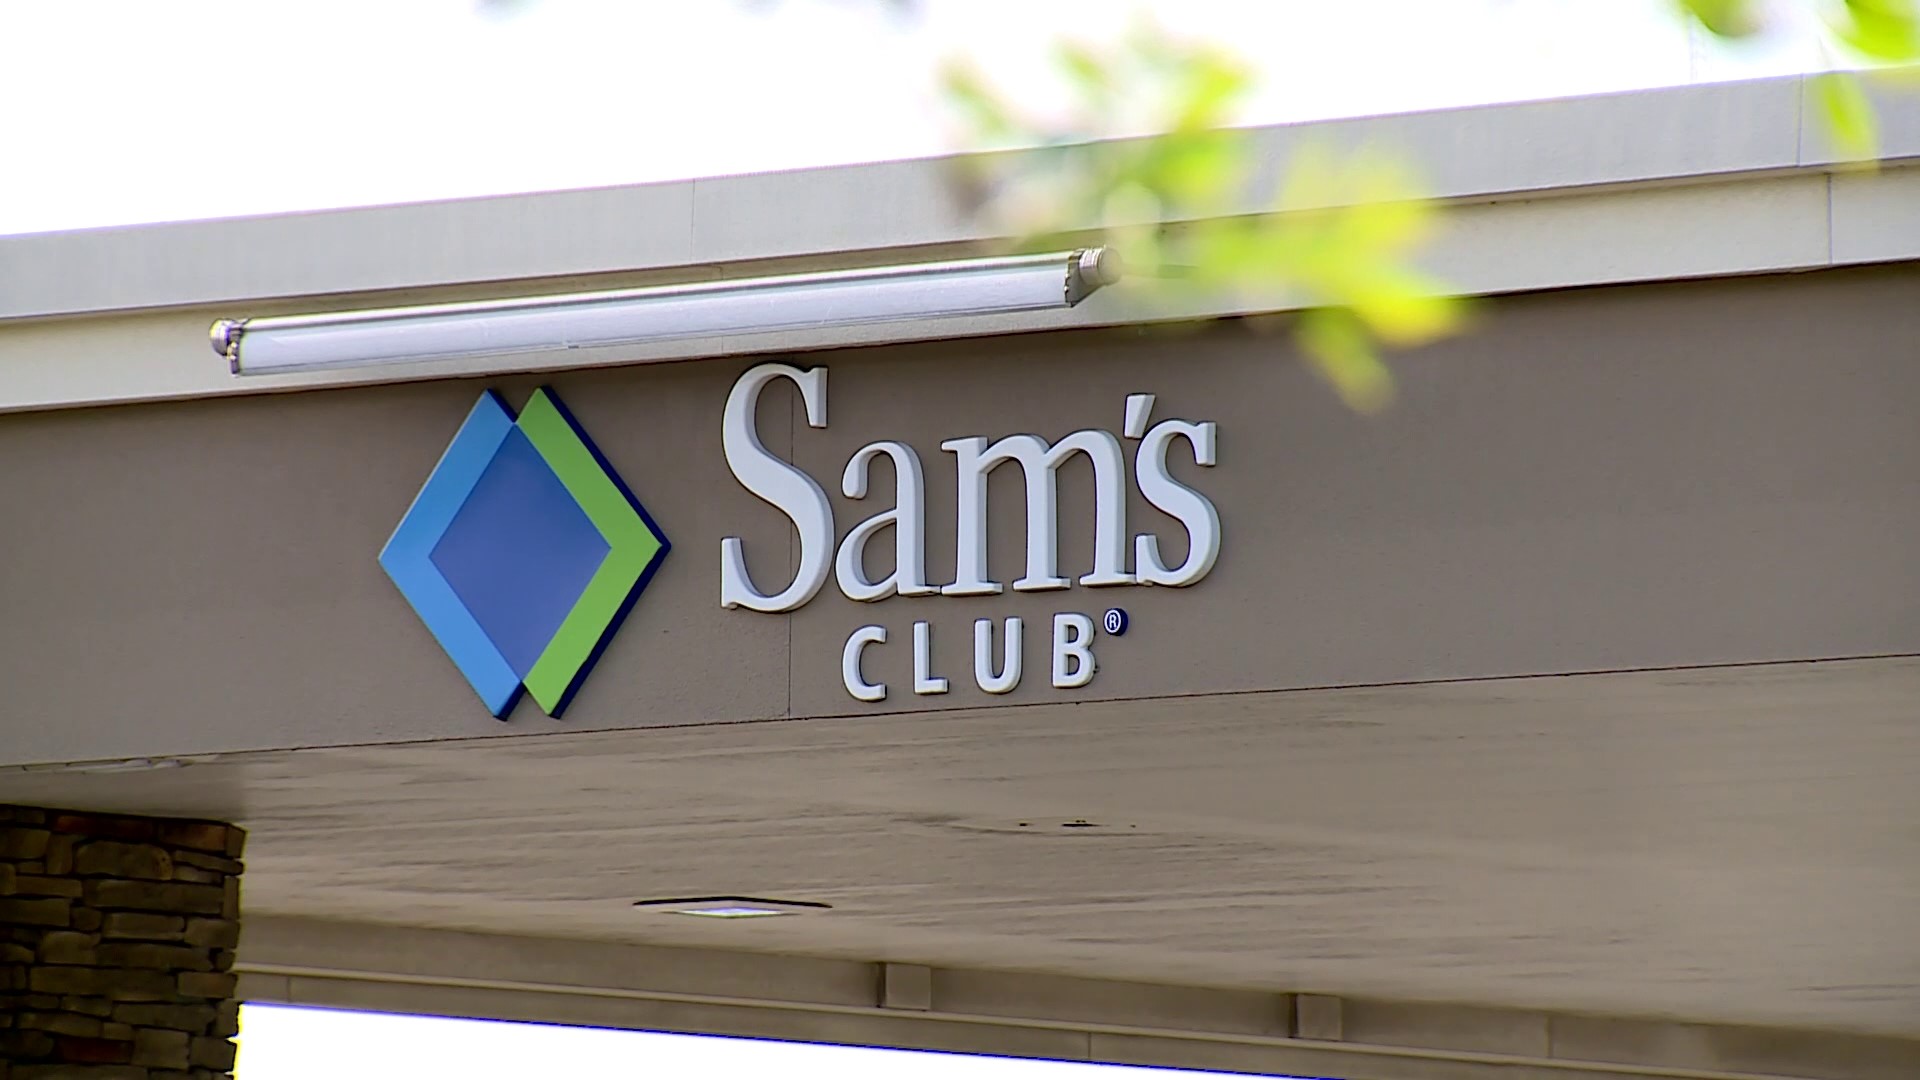 Sam's Club says the wrong fuel was put in the Fayetteville Sam's Club gas station holding tank.